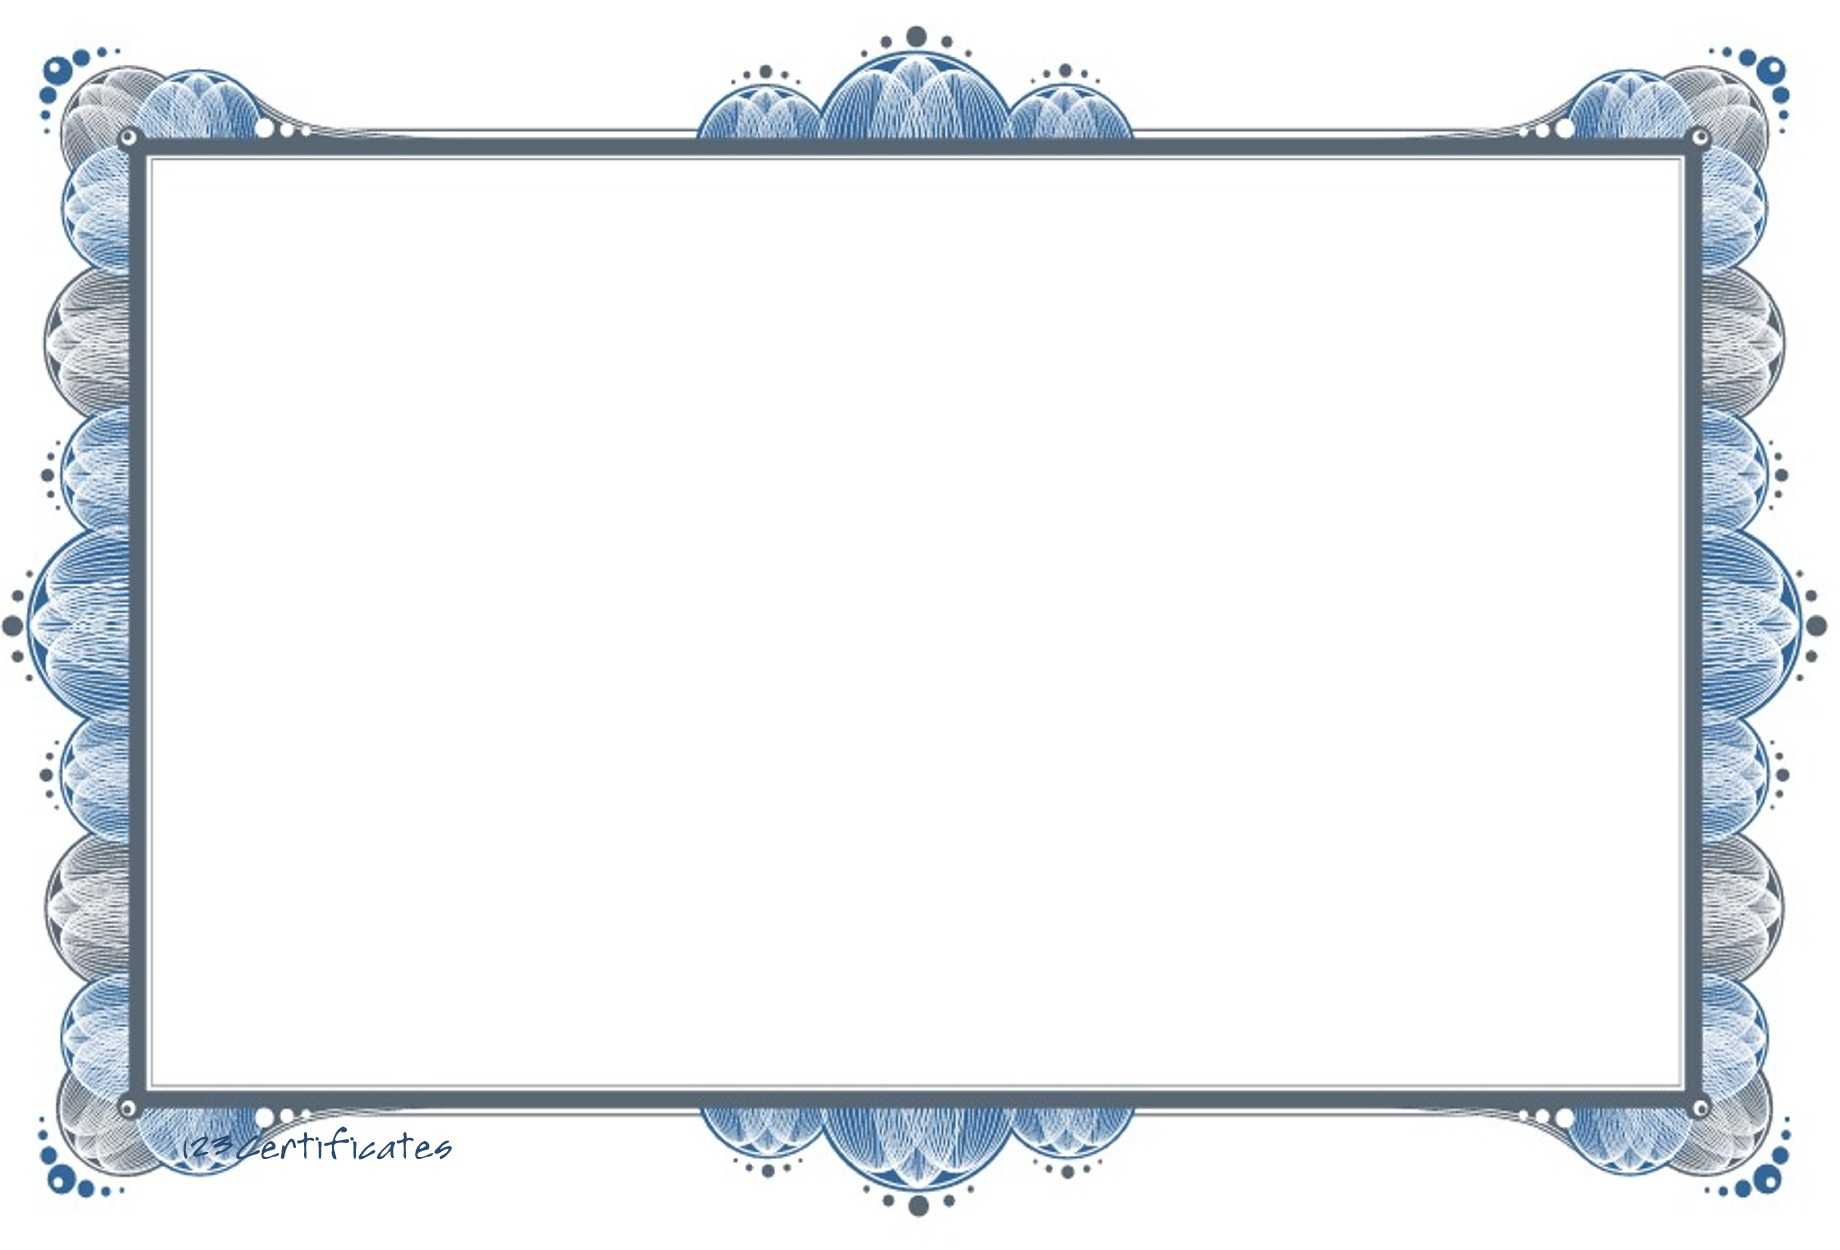 Free Certificate Border, Download Free Clip Art, Free Clip Regarding Free Printable Certificate Border Templates